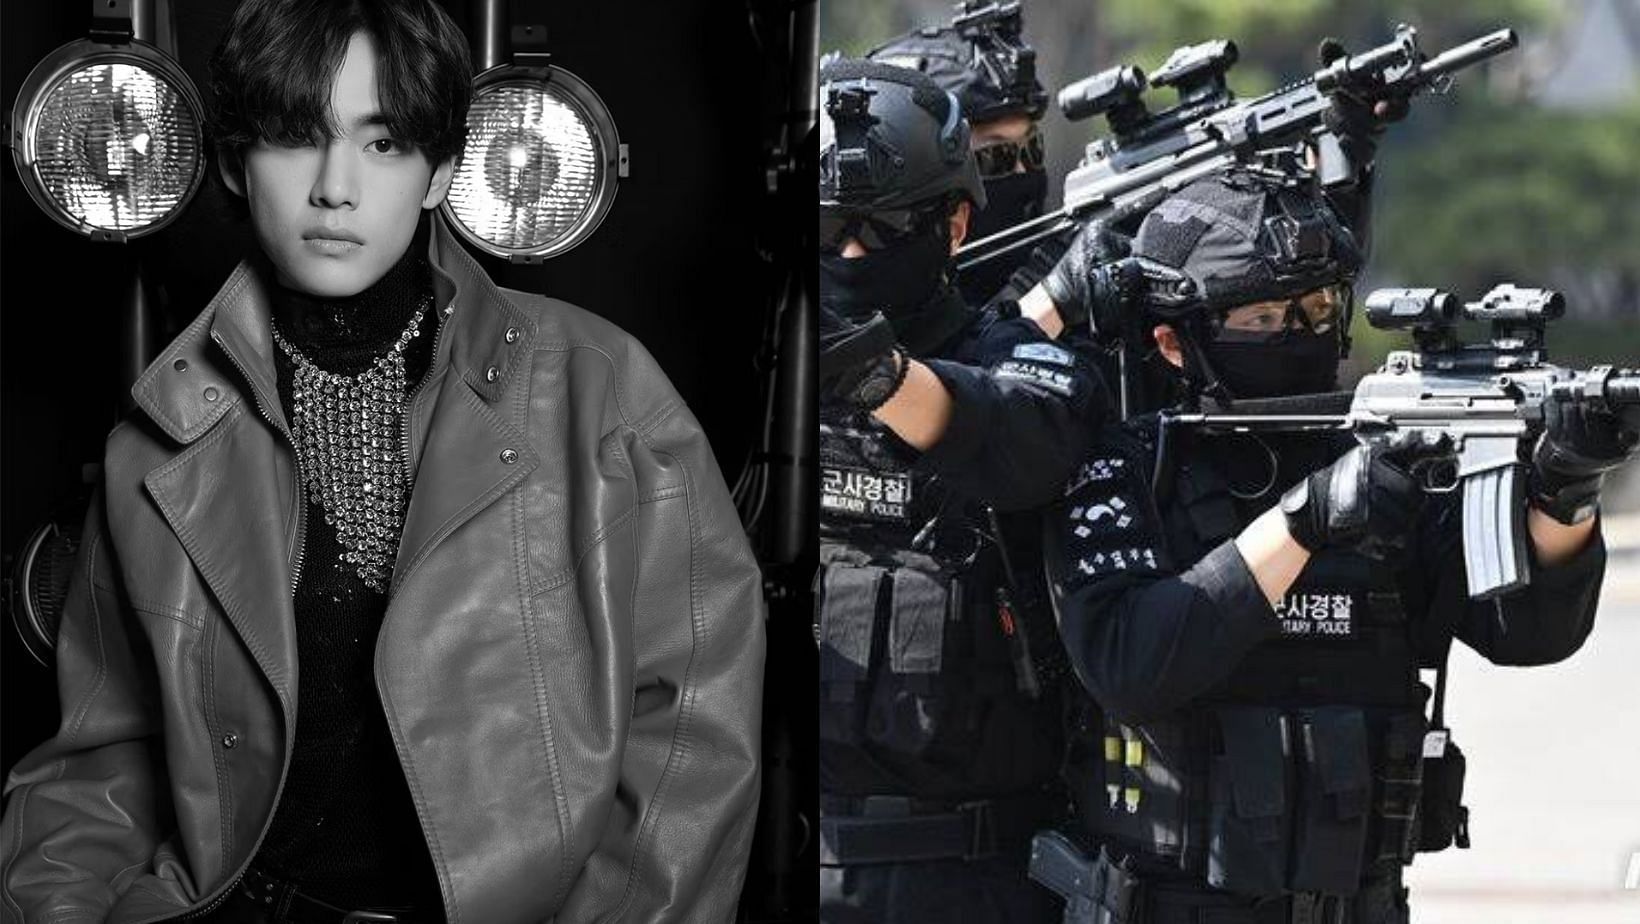 BTS V aka Kim Taheyung joins in SDT unit in South Korean military. (Images via X/@KTH_Nepal &amp; @celineofficial)